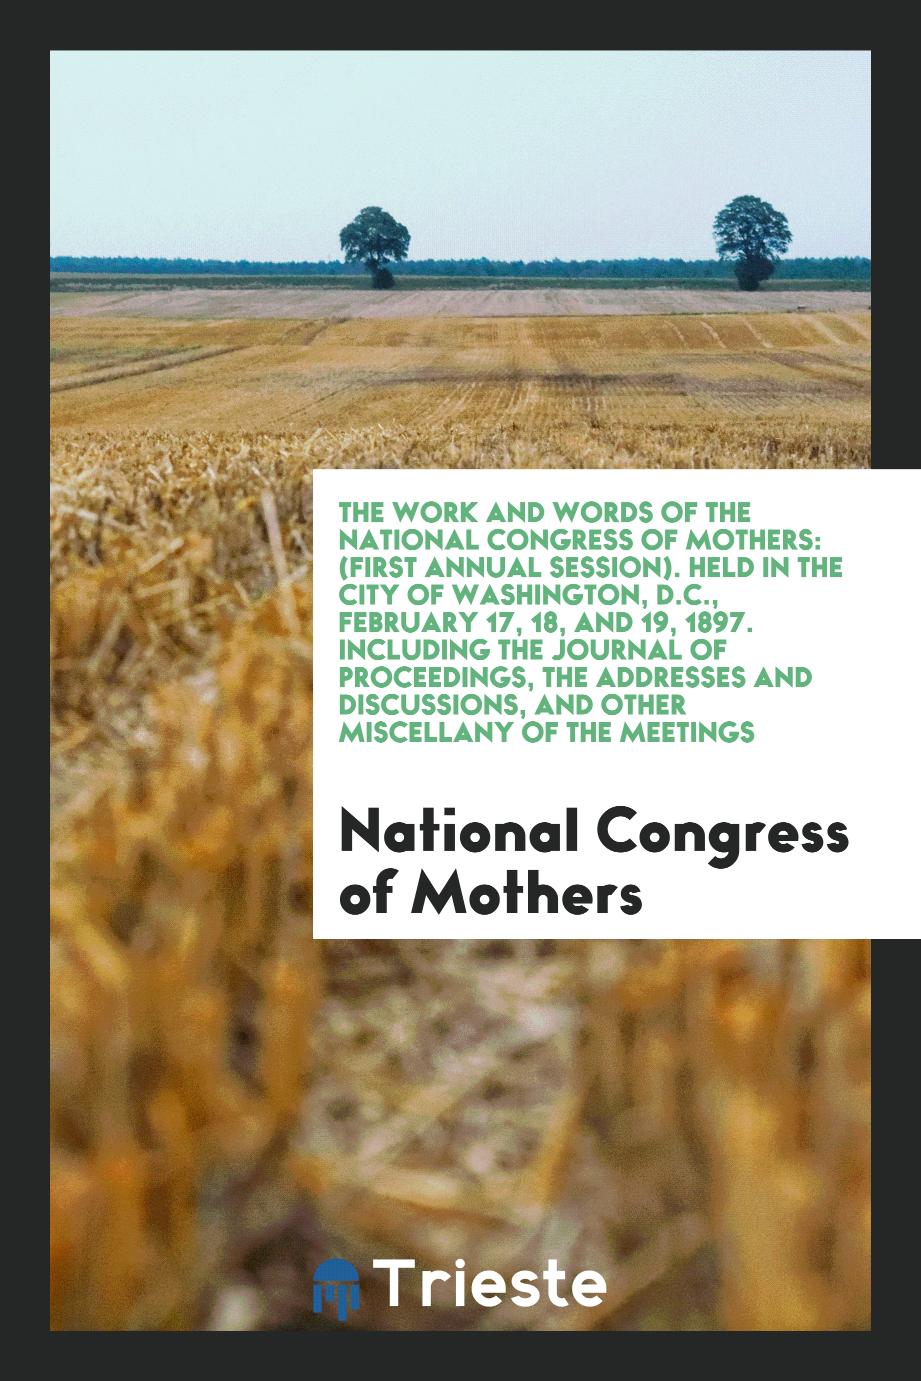 The Work and Words of the National Congress of Mothers: (First Annual Session). Held in the City of Washington, D.C., February 17, 18, and 19, 1897. Including the Journal of Proceedings, the Addresses and Discussions, and Other Miscellany of the Meetings